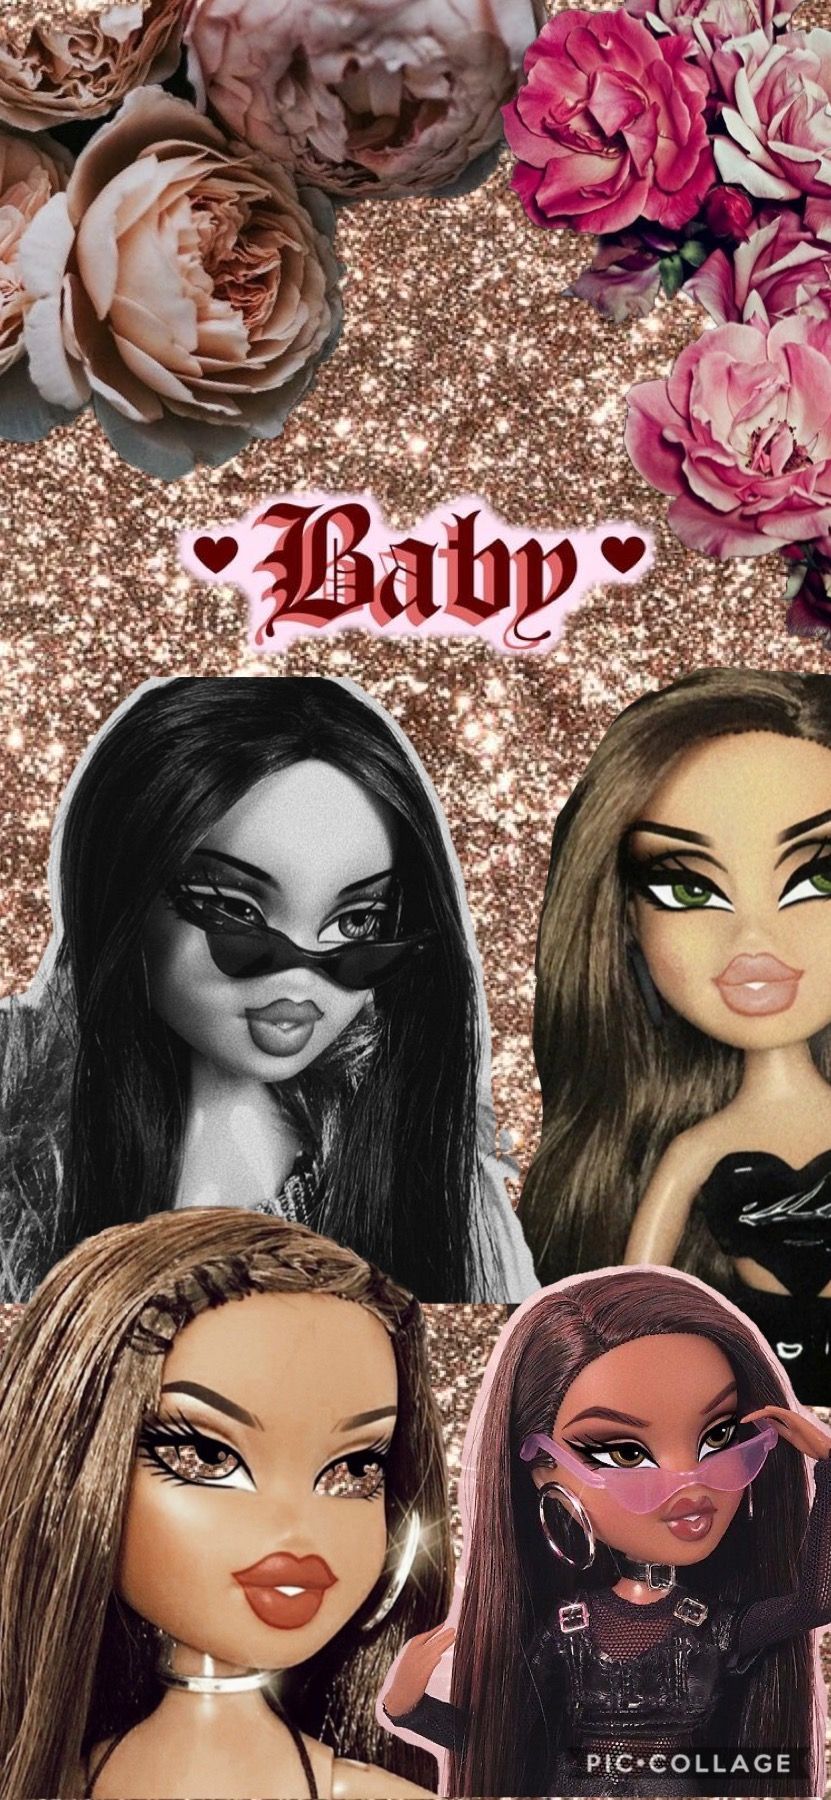 Aesthetic wallpaper of Bratz dolls with the word 